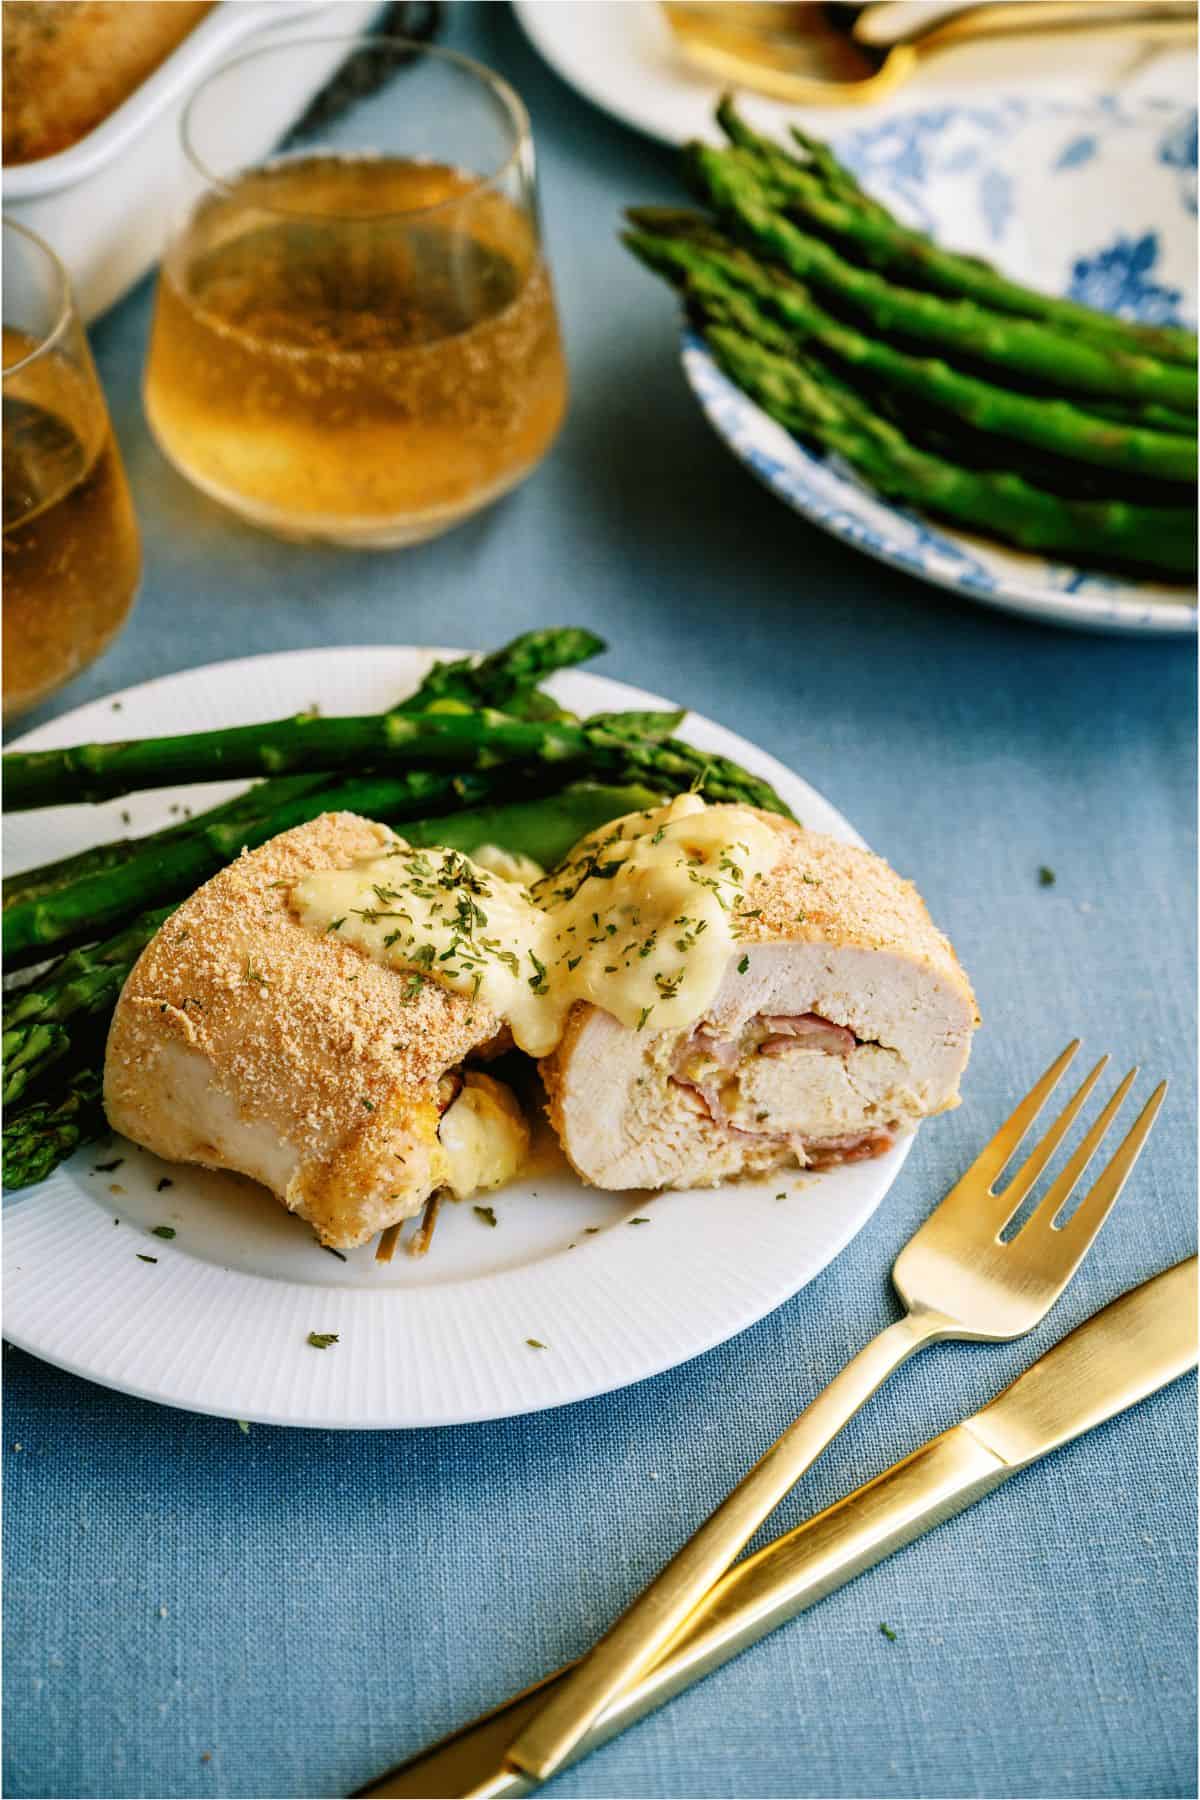 A plate of Asparagus with a Malibu Stuffed Chicken cut in half